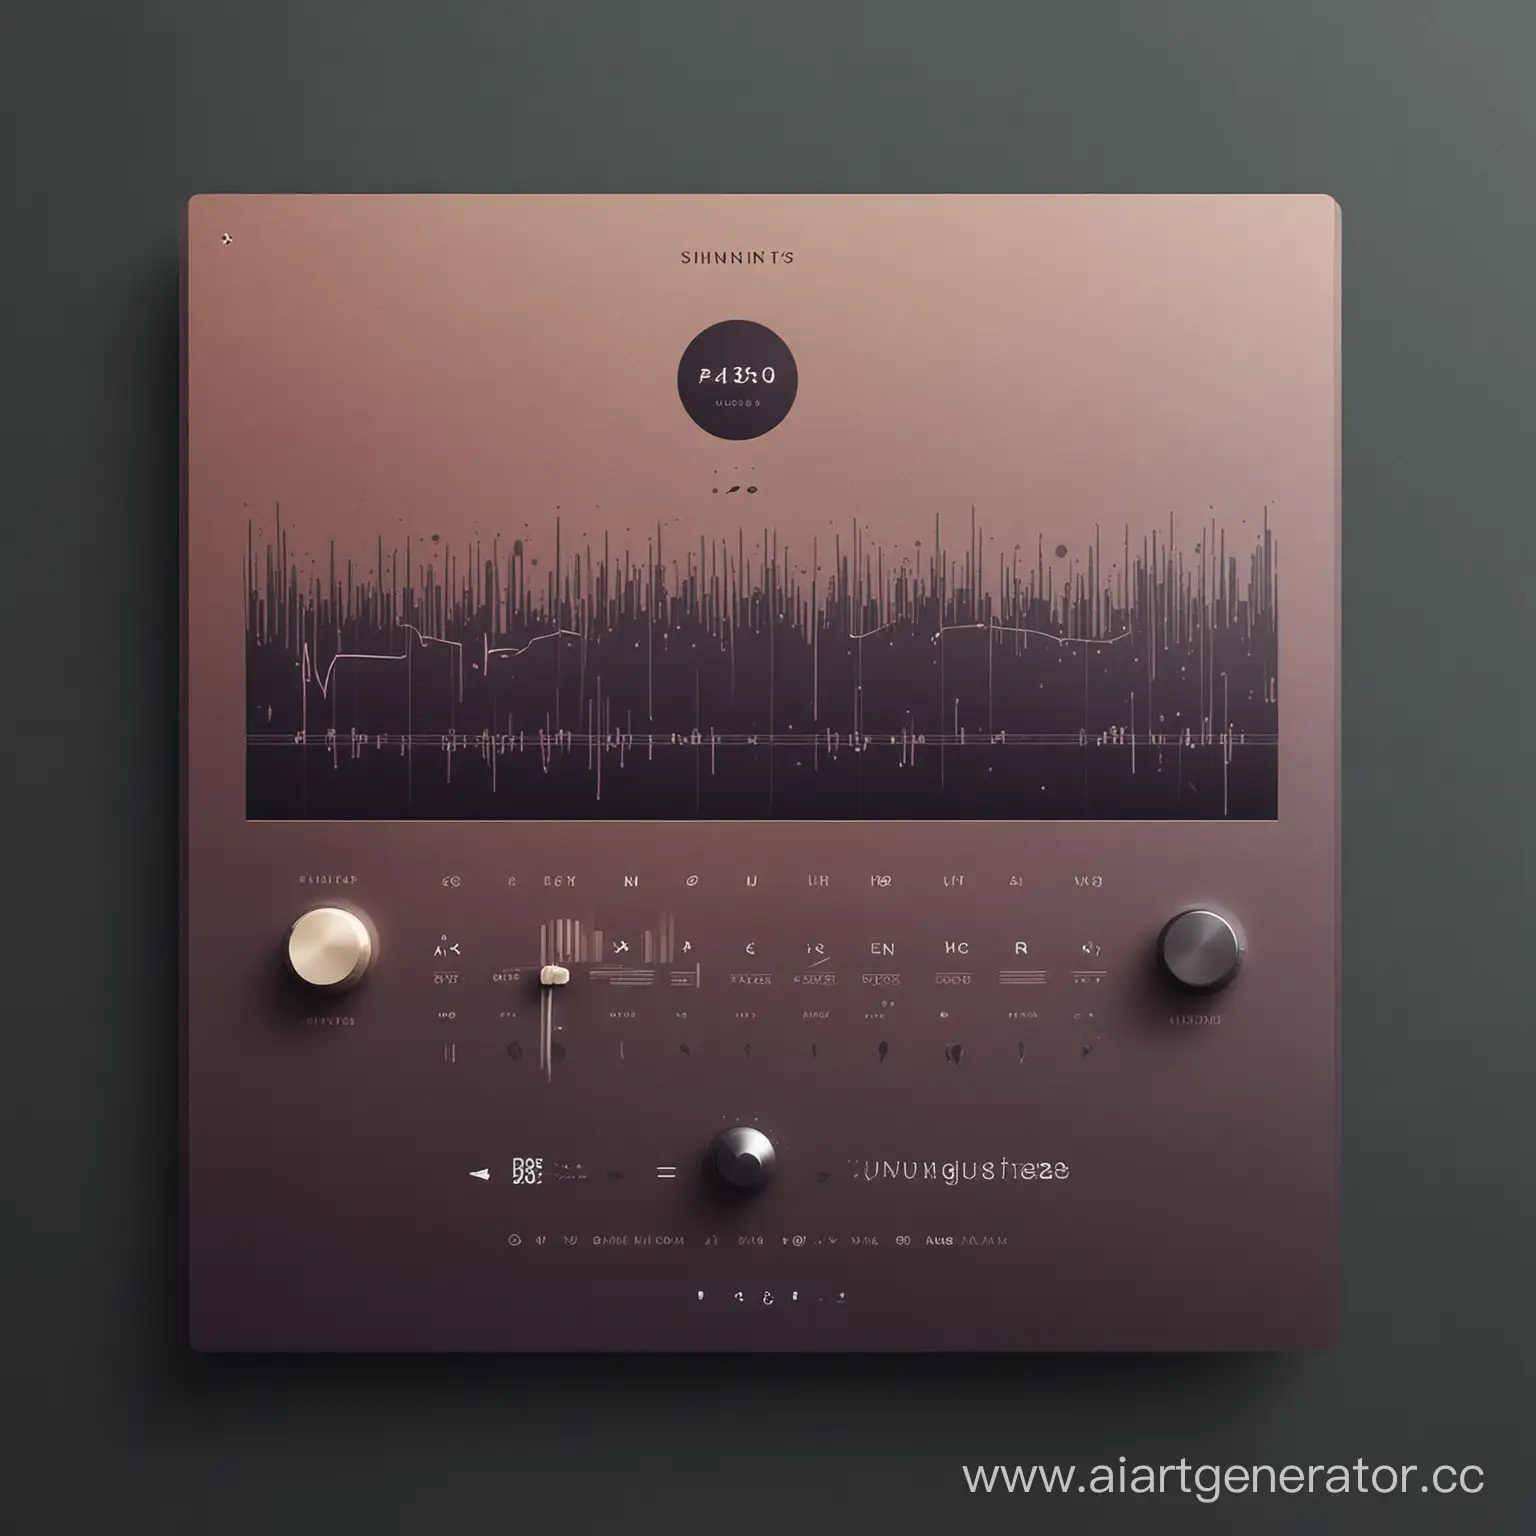 create a minimalistic background image for a website about music and mixing